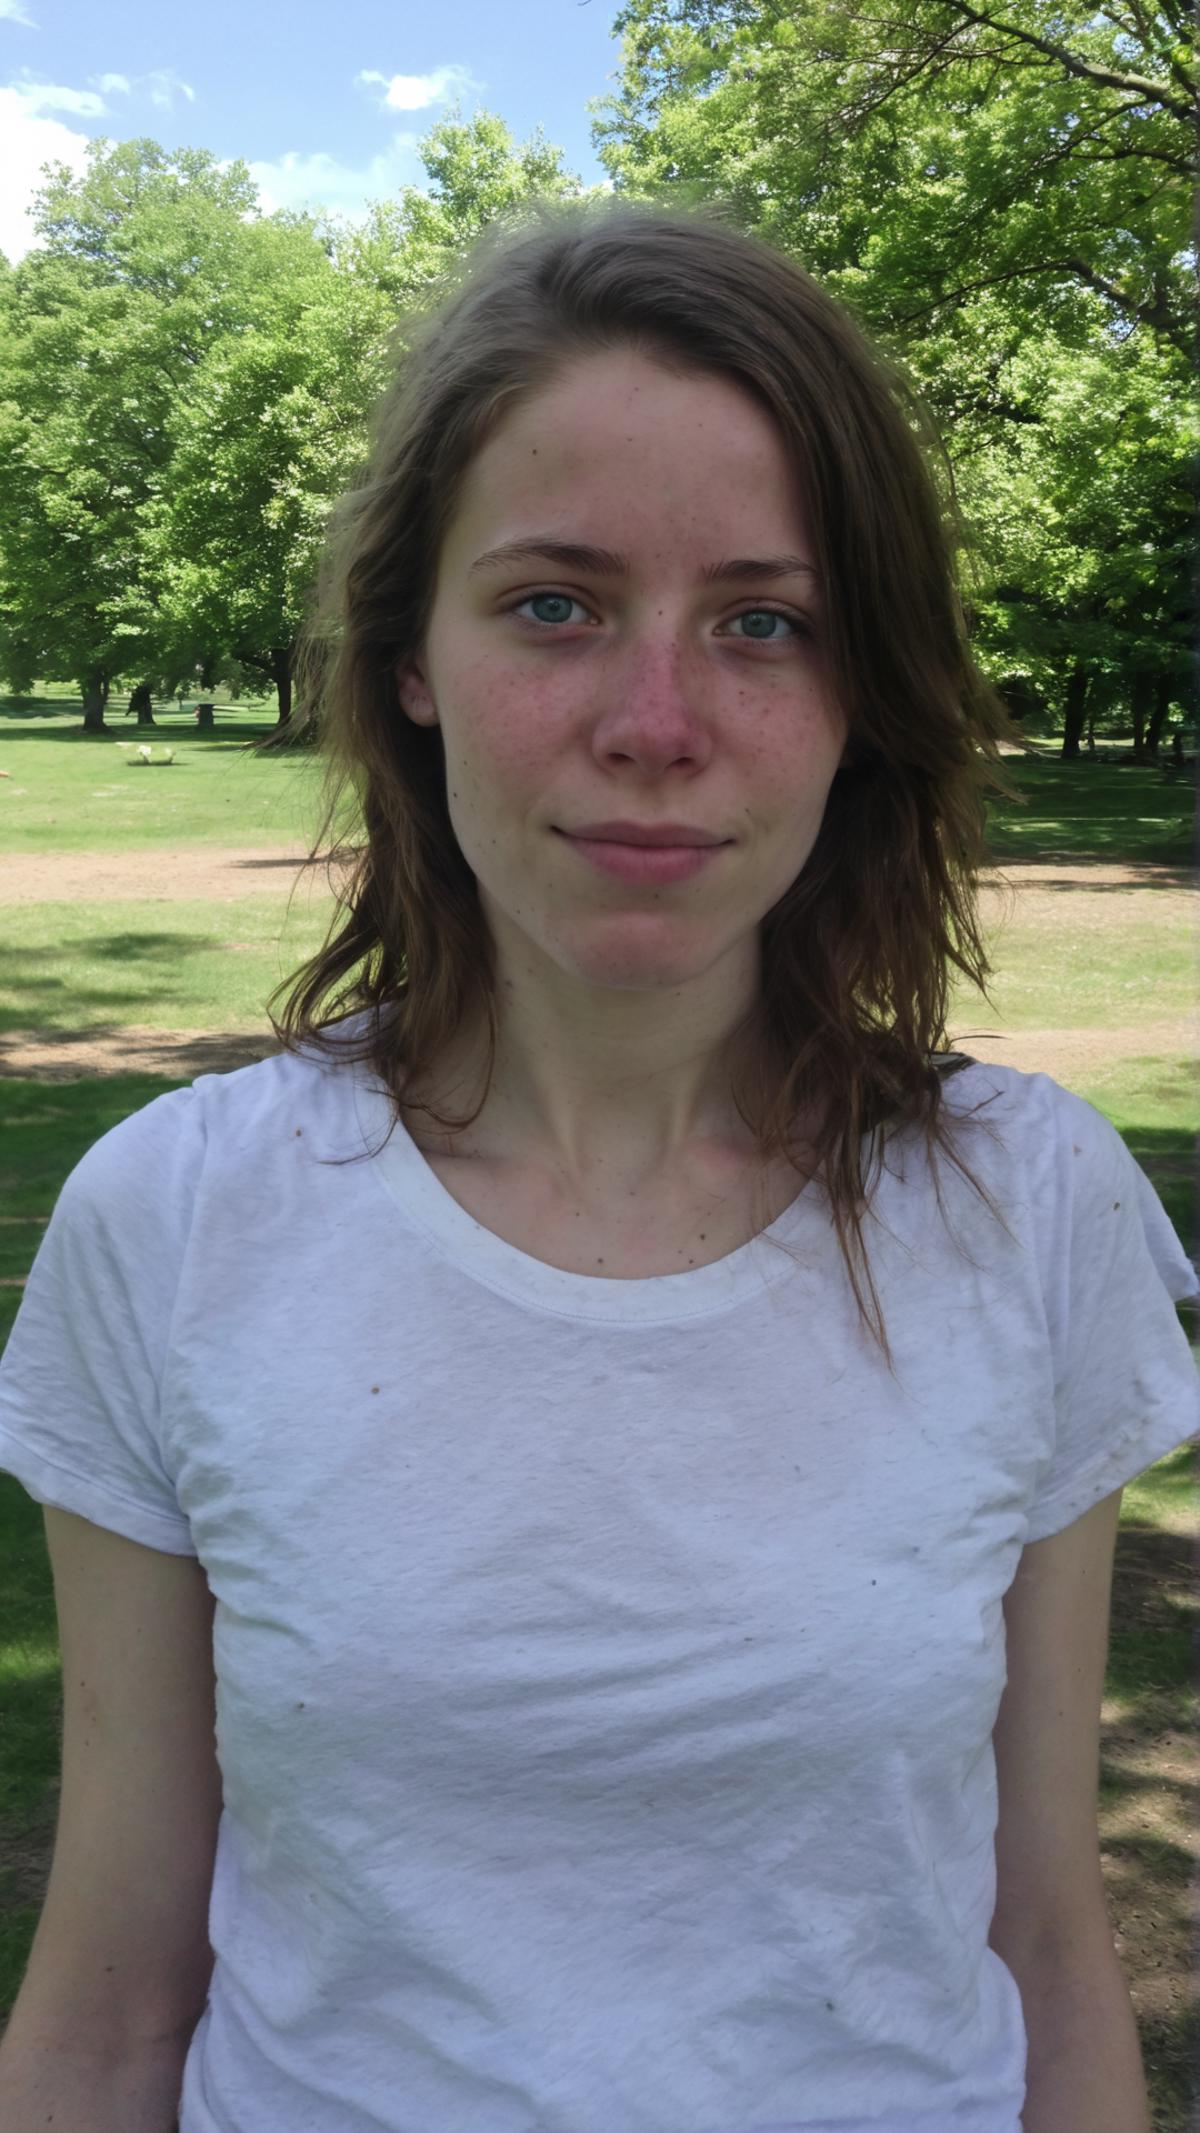 A young woman with freckles and a white shirt, looking at the camera.